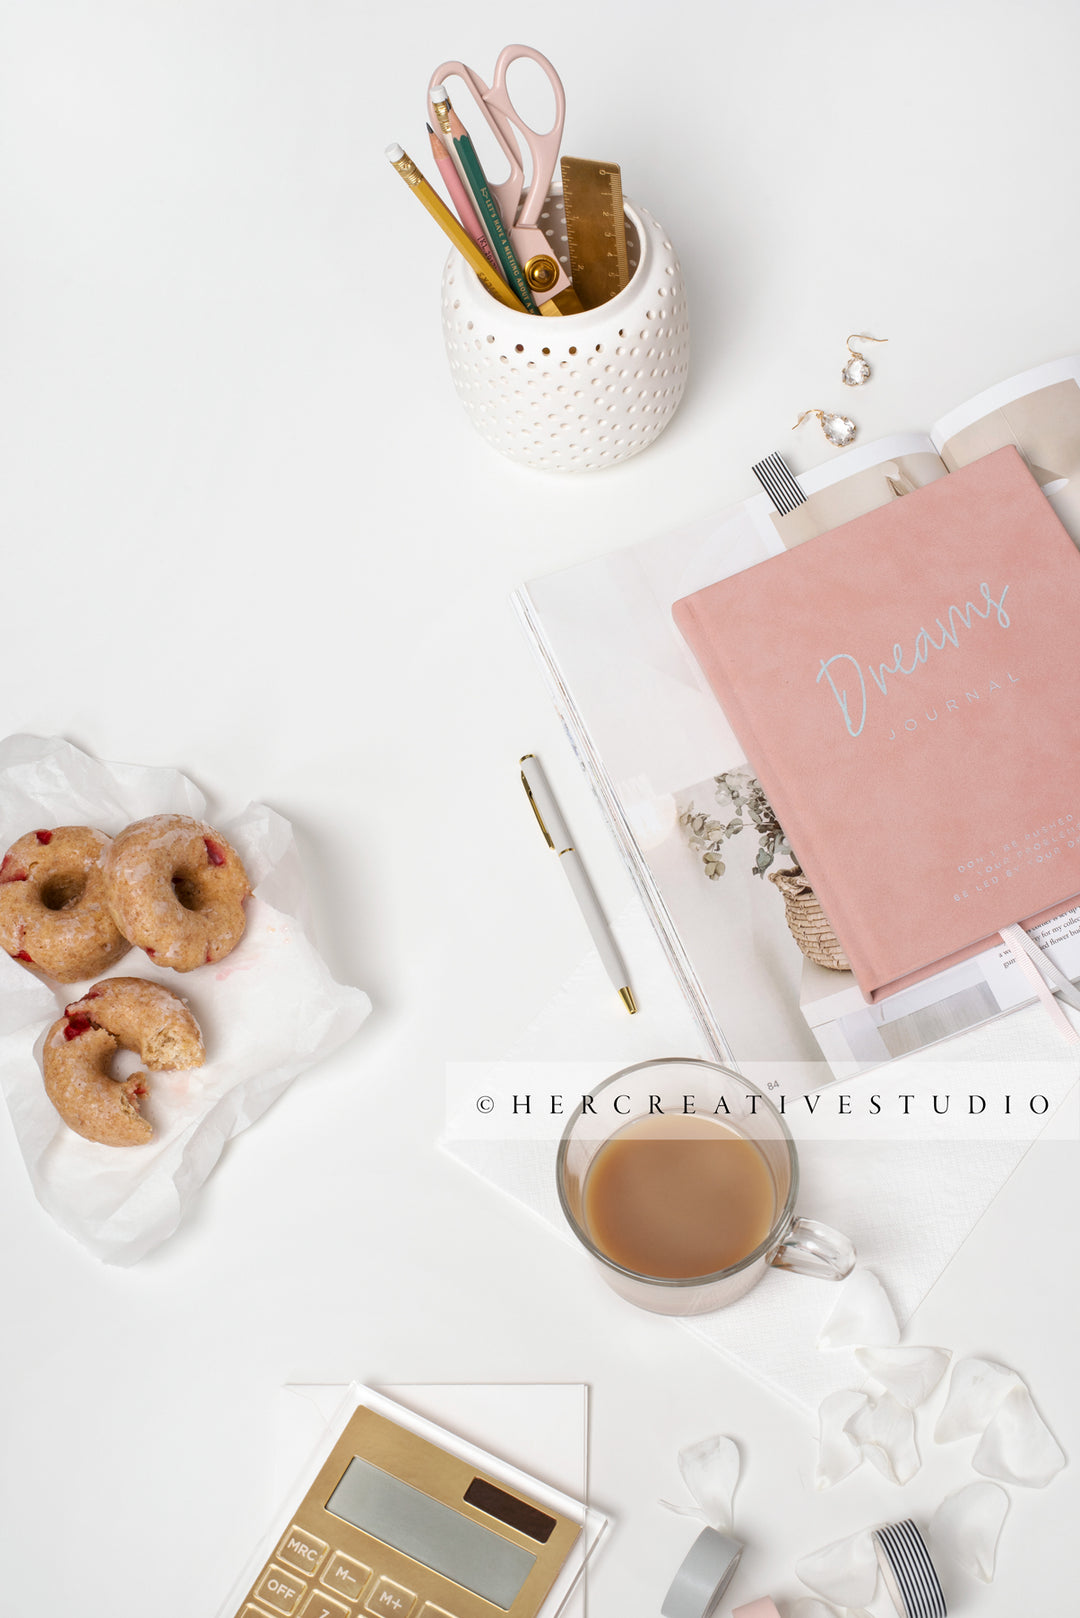 Calculator, Donuts & Coffee on White Background, Styled Stock Image